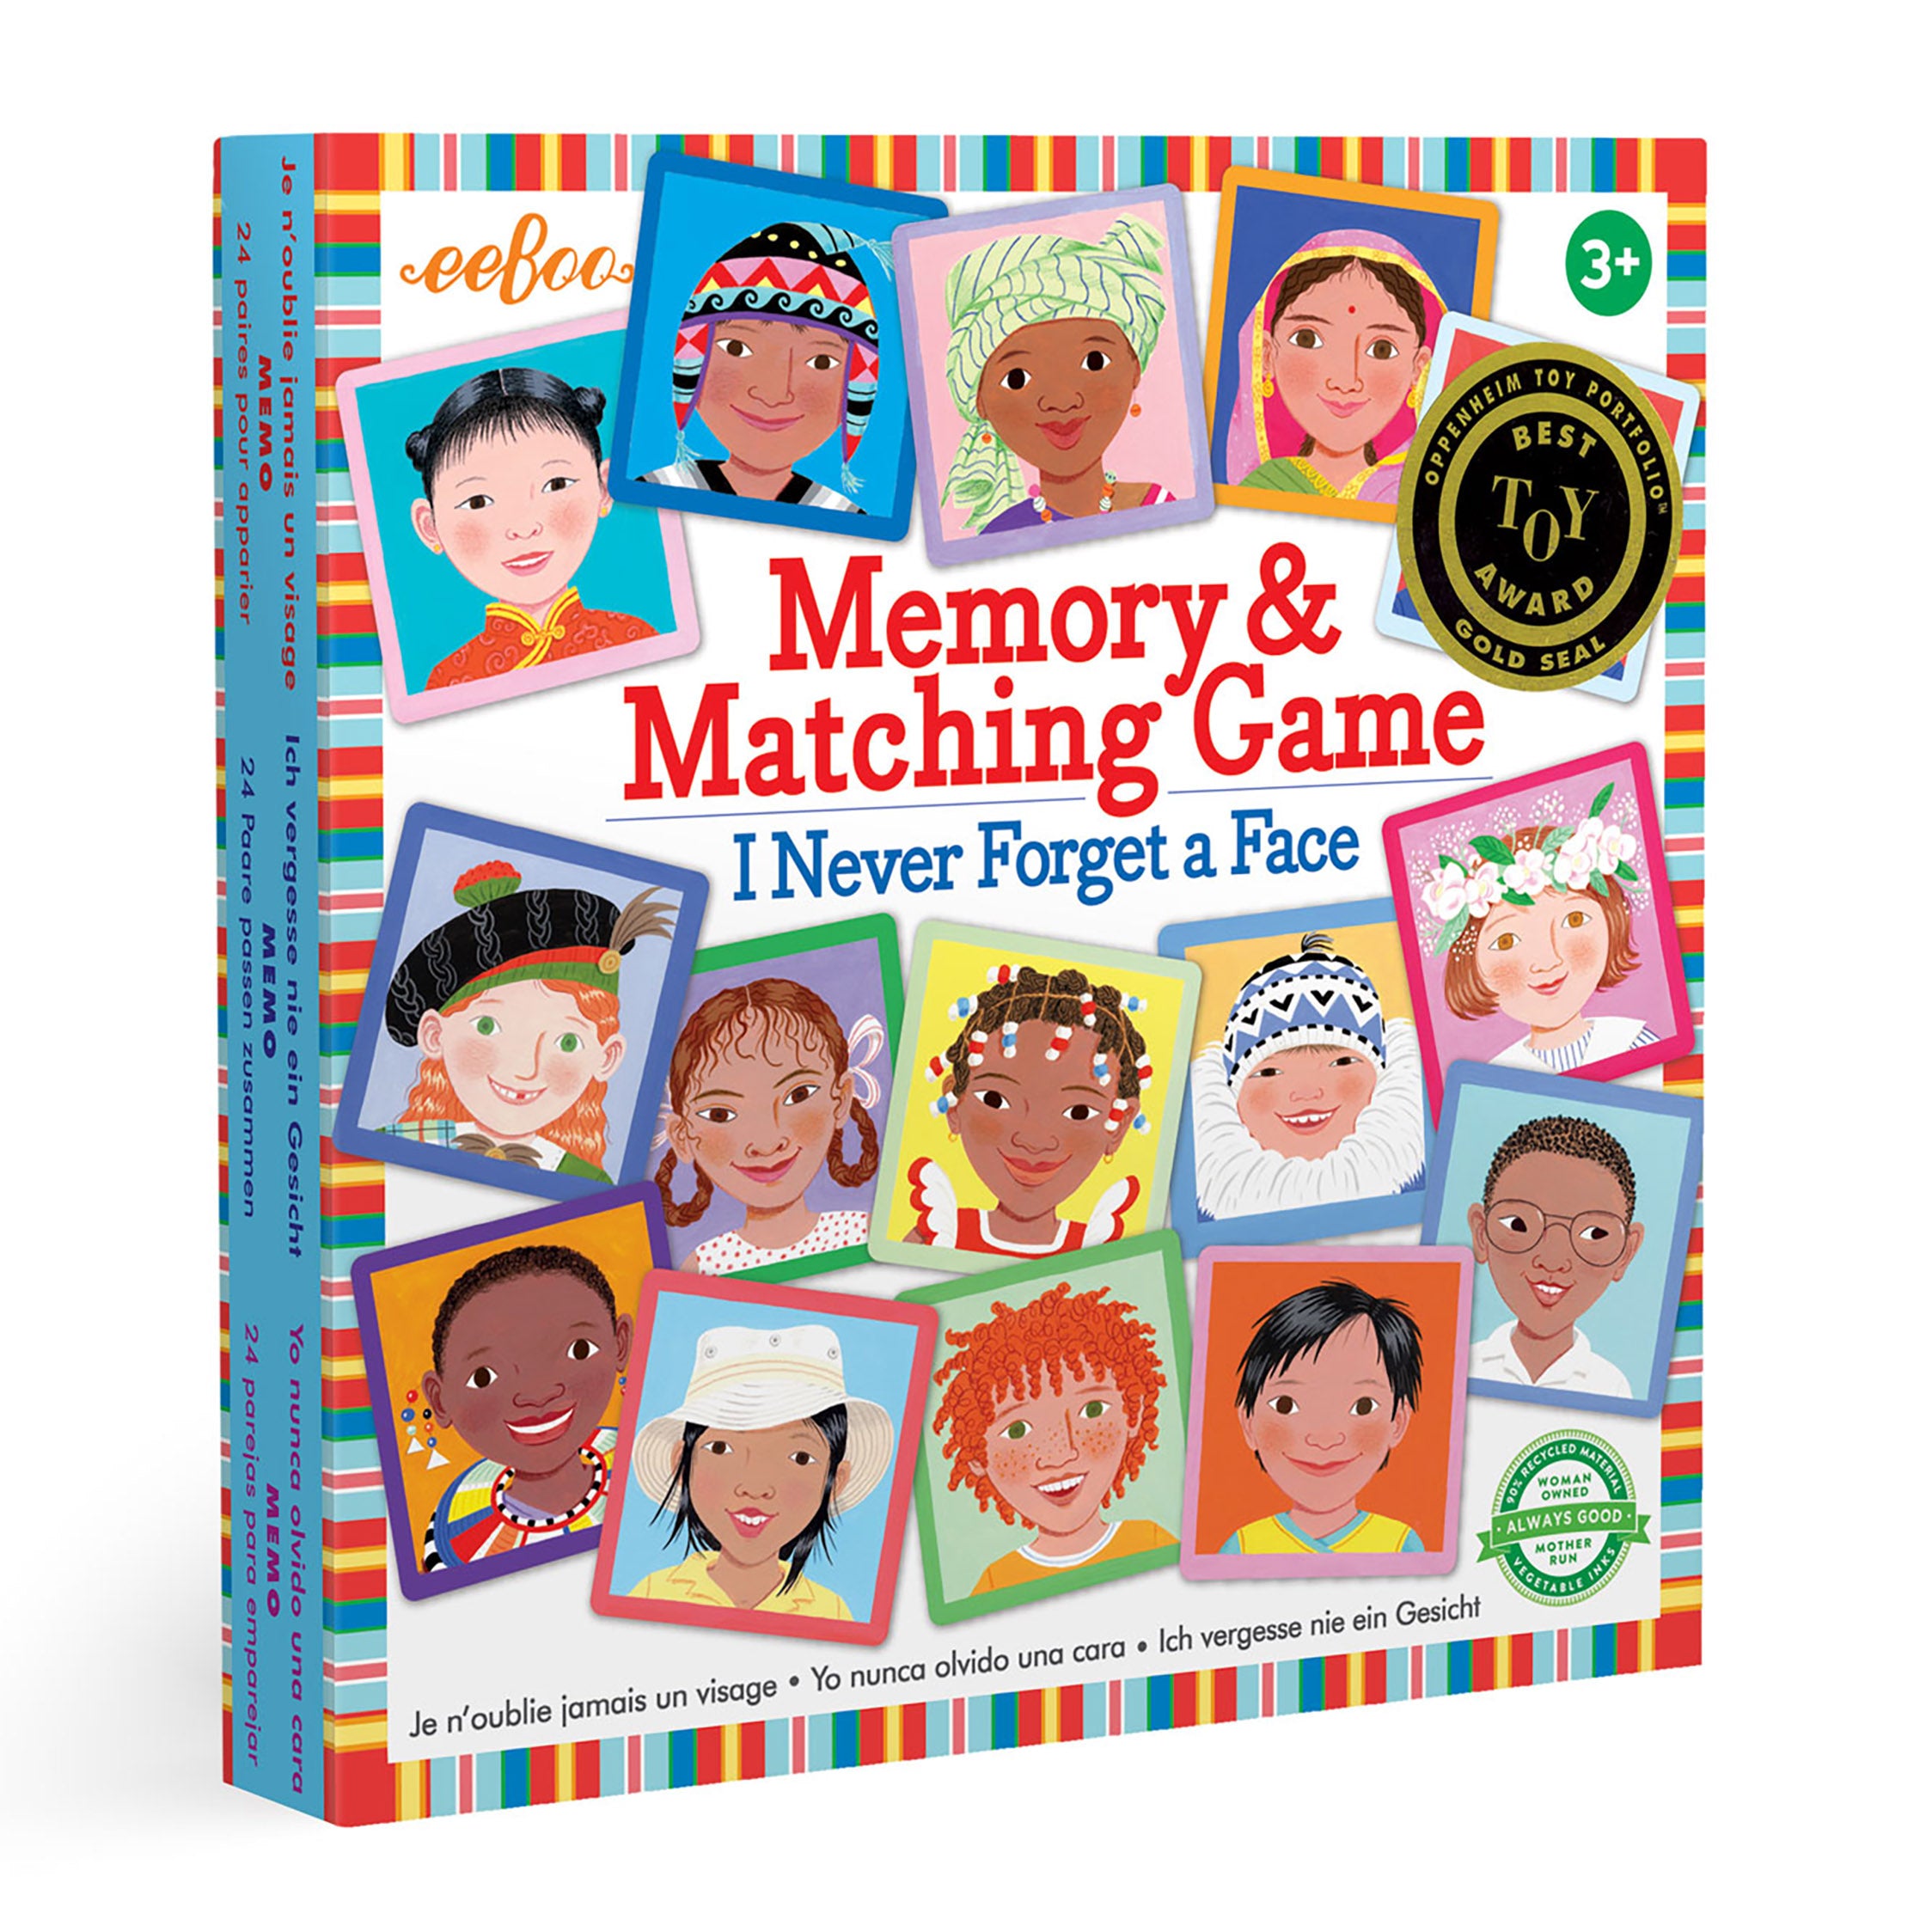 I Never Forget a Face Award Winning Memory and Matching Game by eeBoo